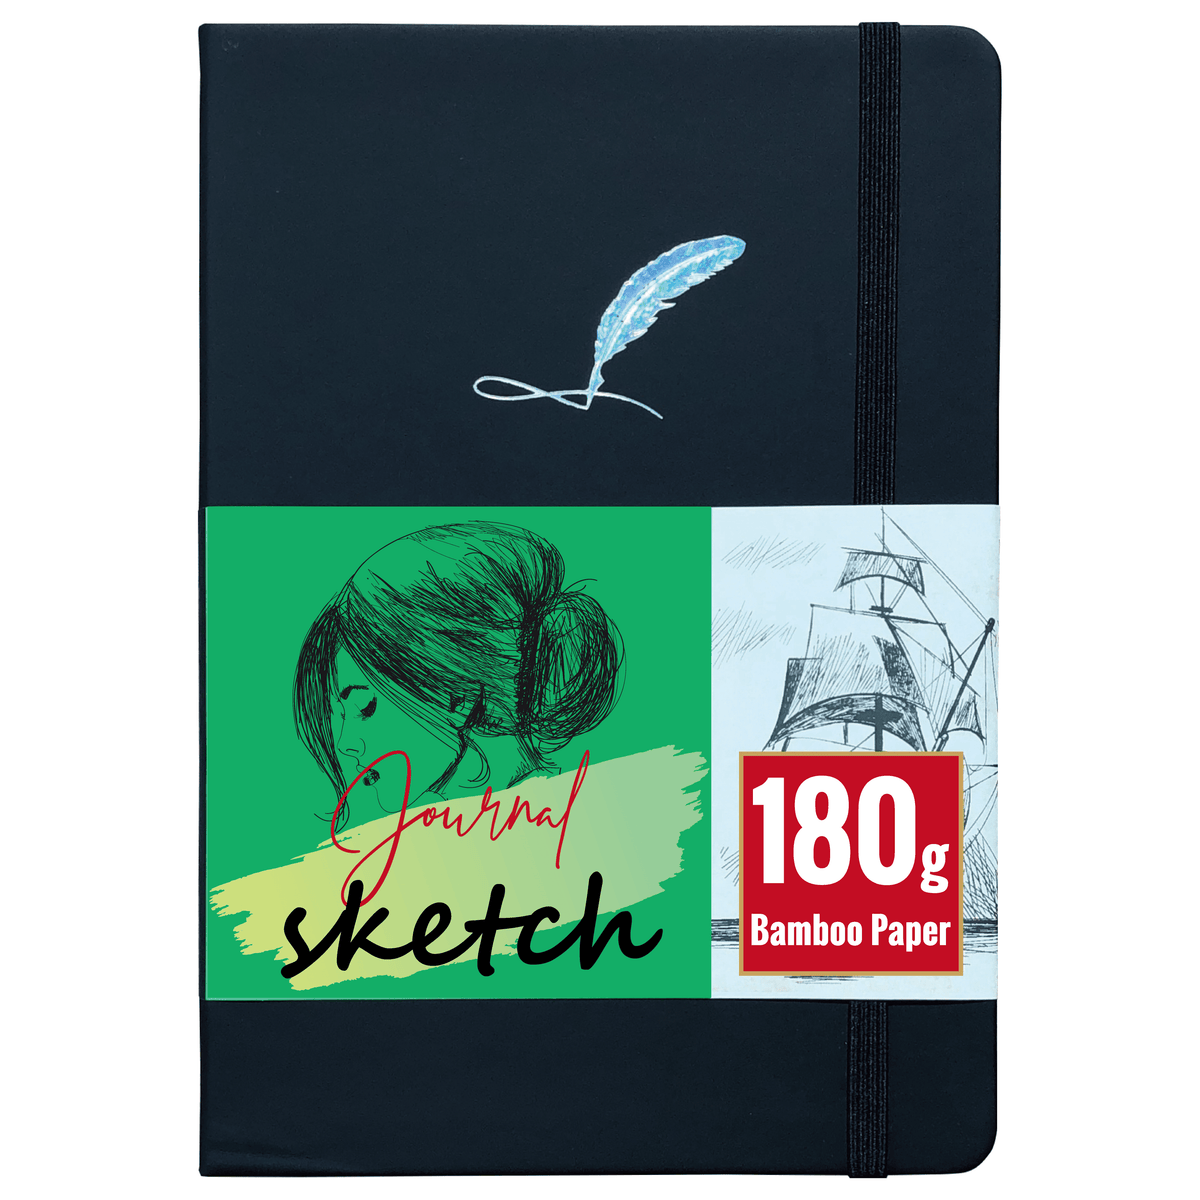 A5 Hardcover Sketchbook All Blank Pages, 180Gsm Bamboo Paper